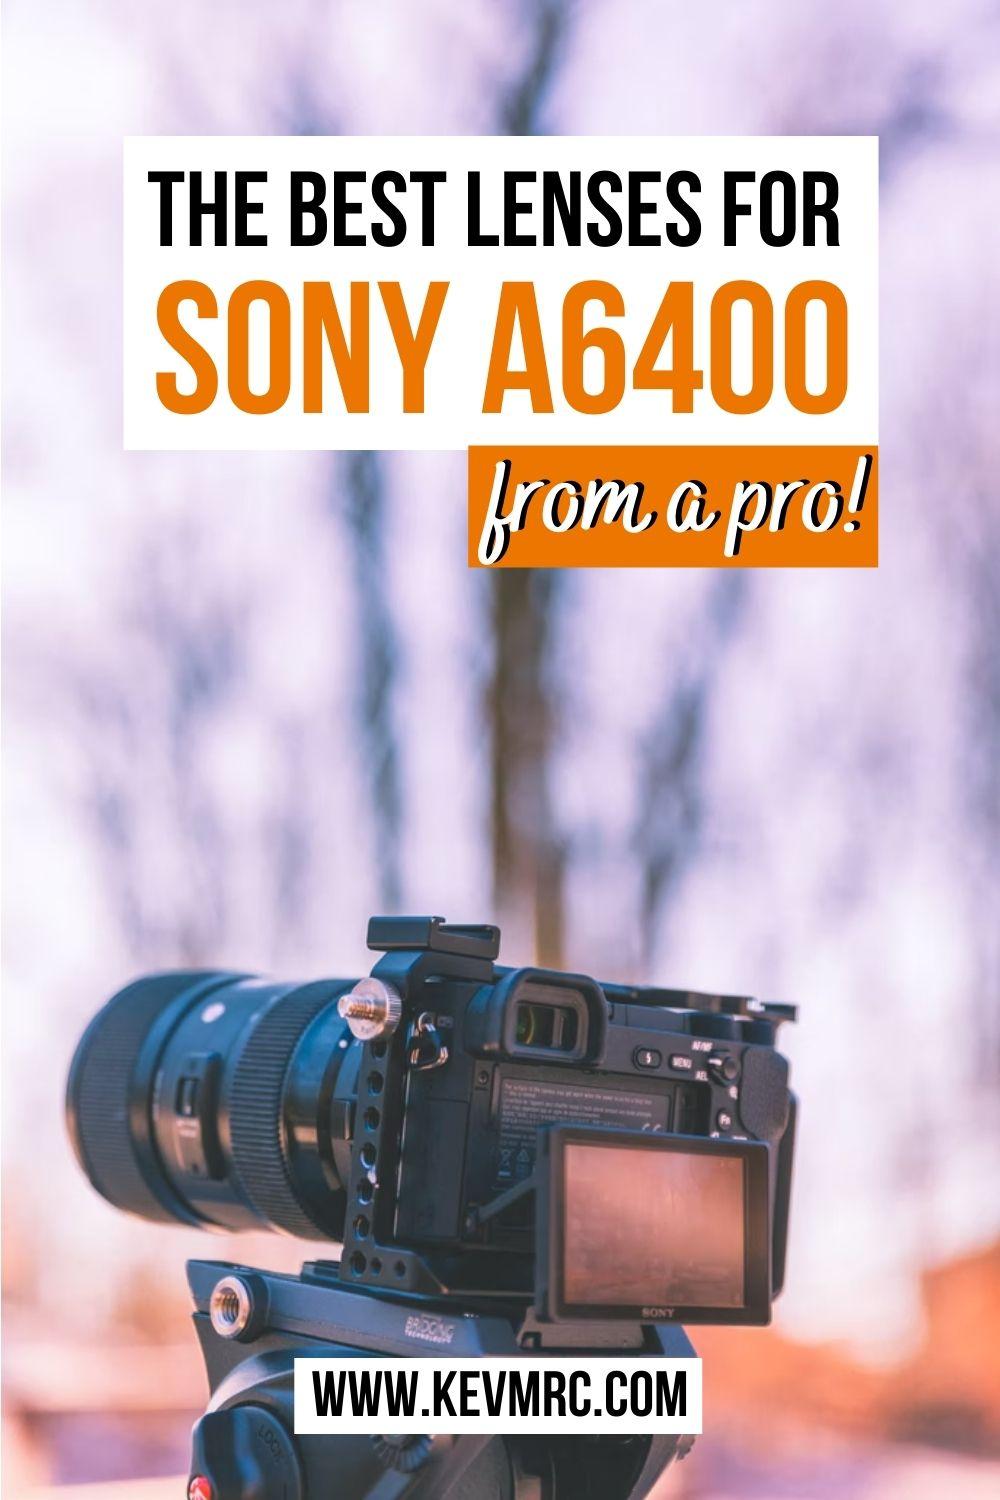 Looking for a lens for your Sony a6400? Then this guide of the best lenses for Sony a6400 is exactly what you need! sony a6400 photography |  sony a6400 product photography | sony a6400 tips | sony a6400 accessories | camera lens guide